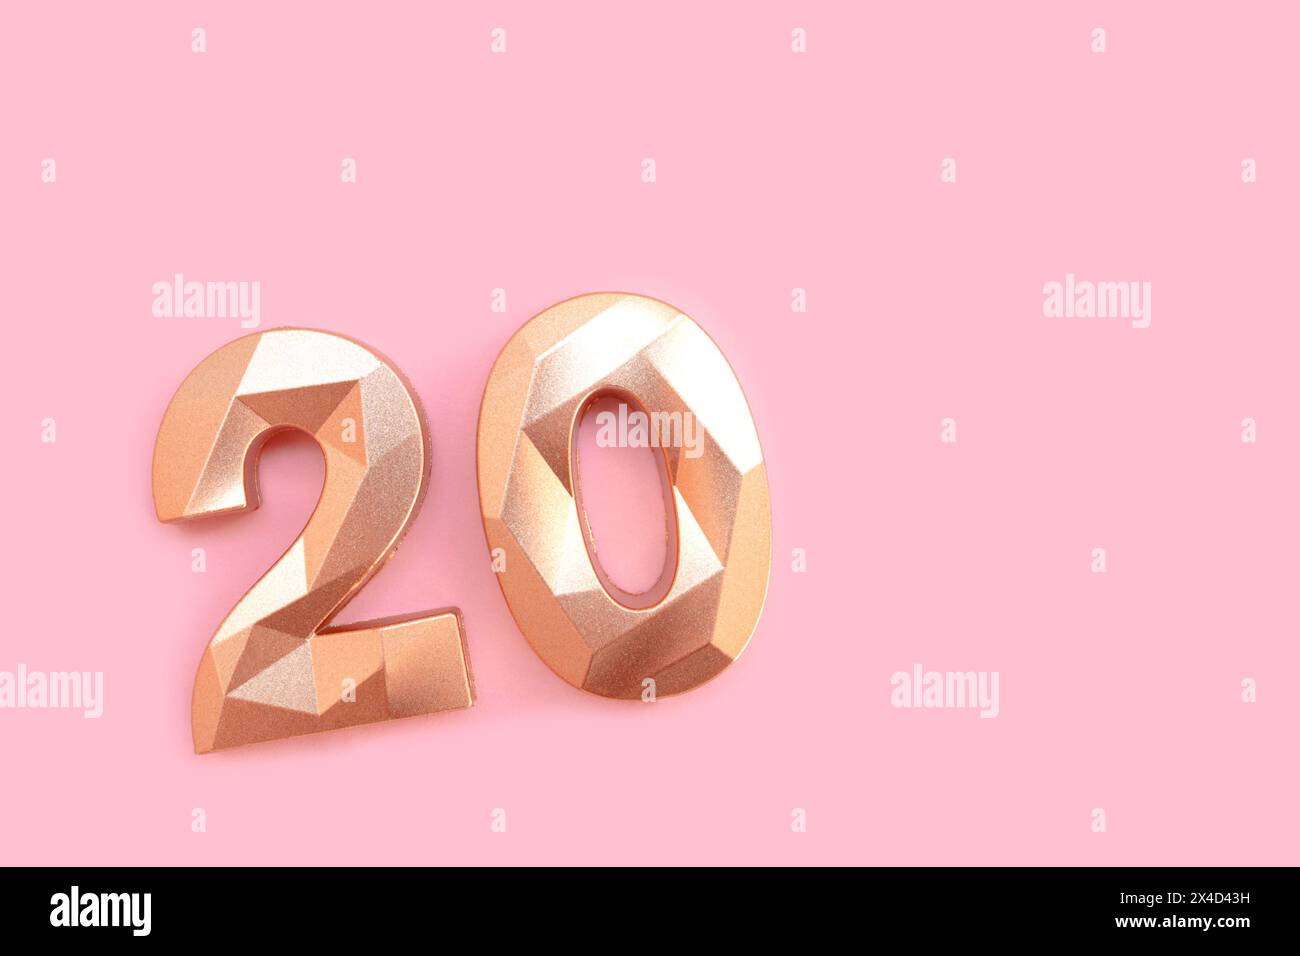 Gold colored number twenty on a pink background with copy space. Stock Photo